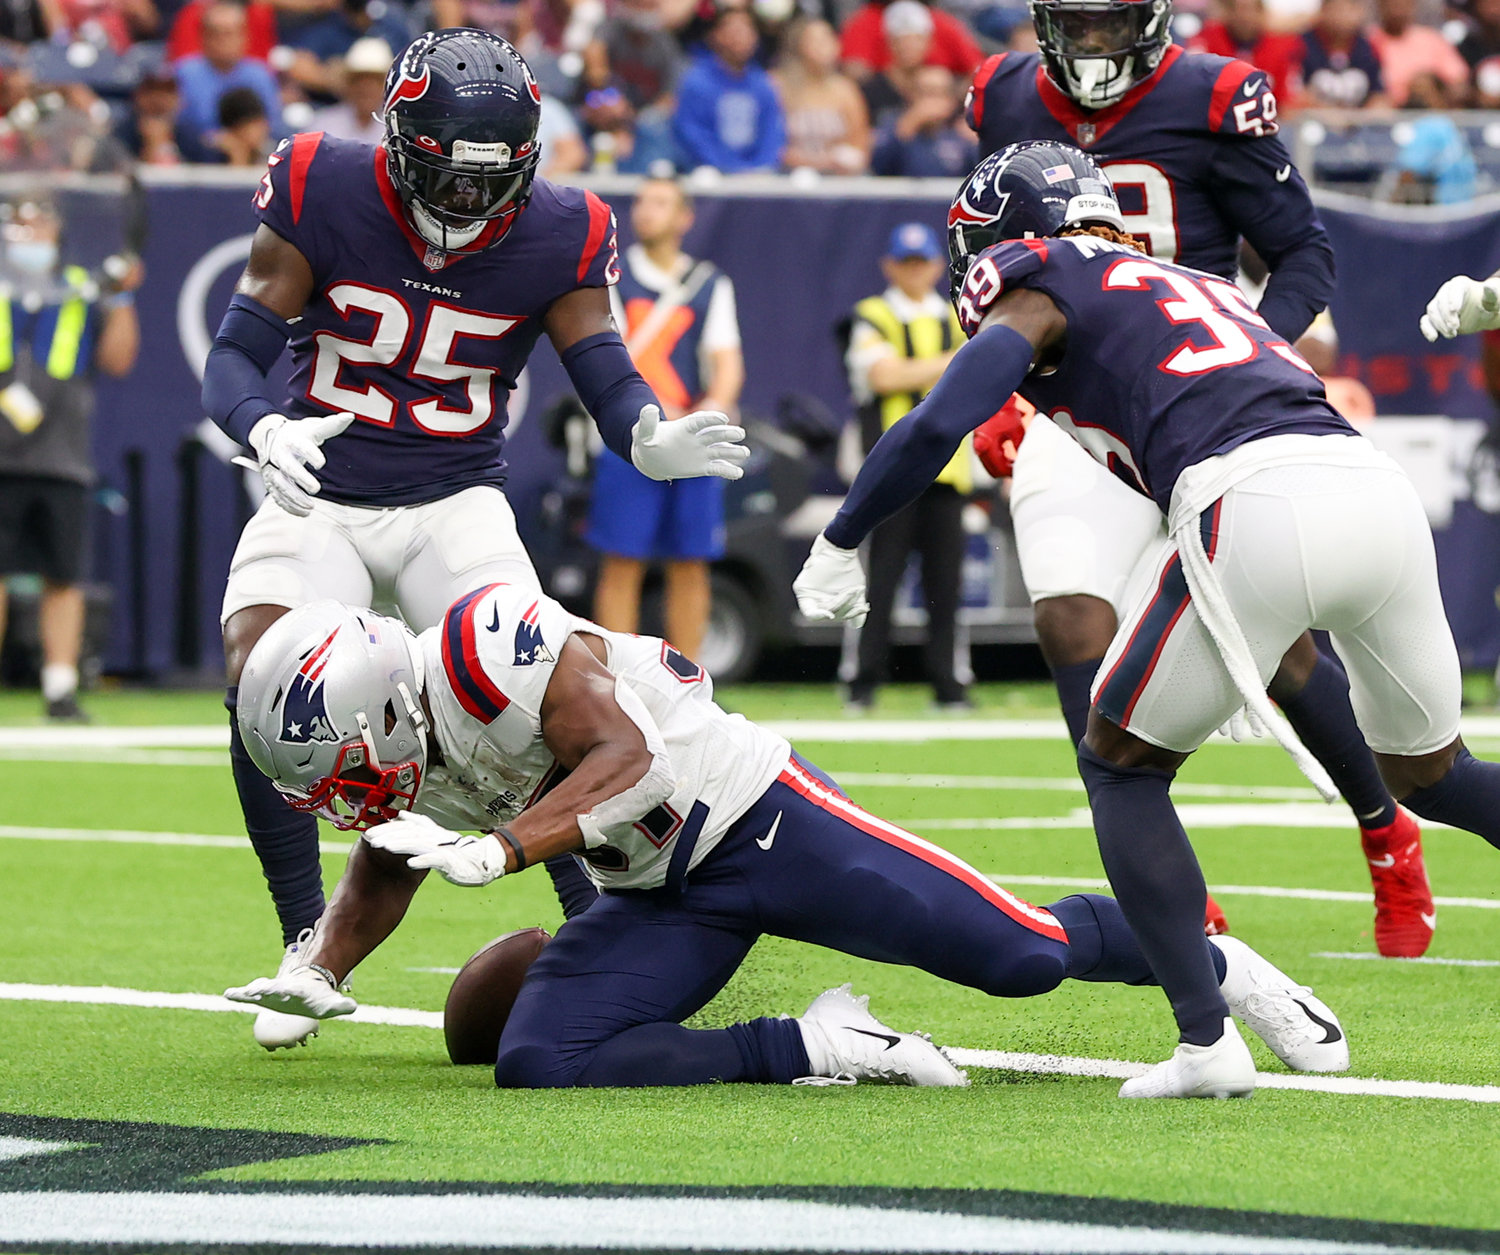 New England Patriots running back Damien Harris (37) loses the ball just before crossing the goal line, with game officials ruling on video review that Houston Texans cornerback Terrance Mitchell (39) punched the ball out to force a fumble before a touchdown during an NFL game between Houston and New England on October 10, 2021 in Houston, Texas. The Patriots won 25-22.